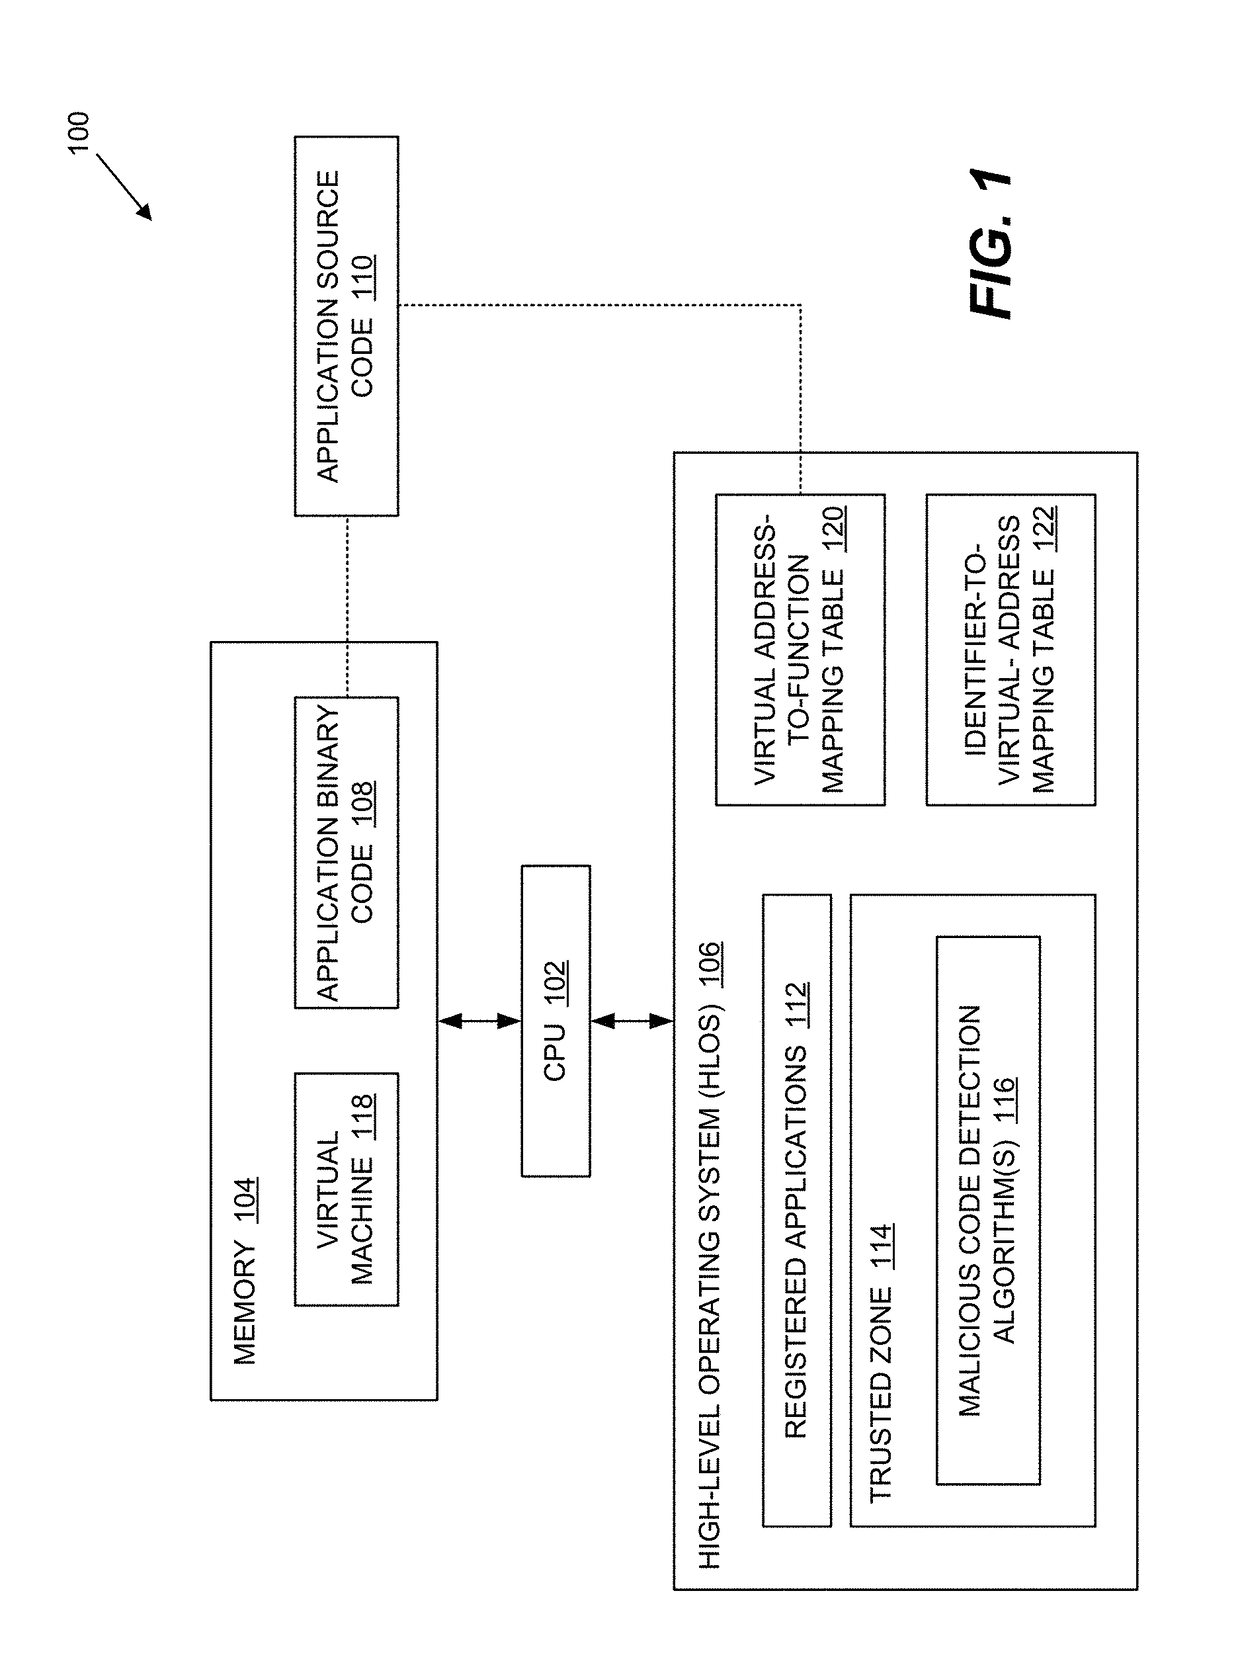 Kernel-based detection of target application functionality using virtual address mapping